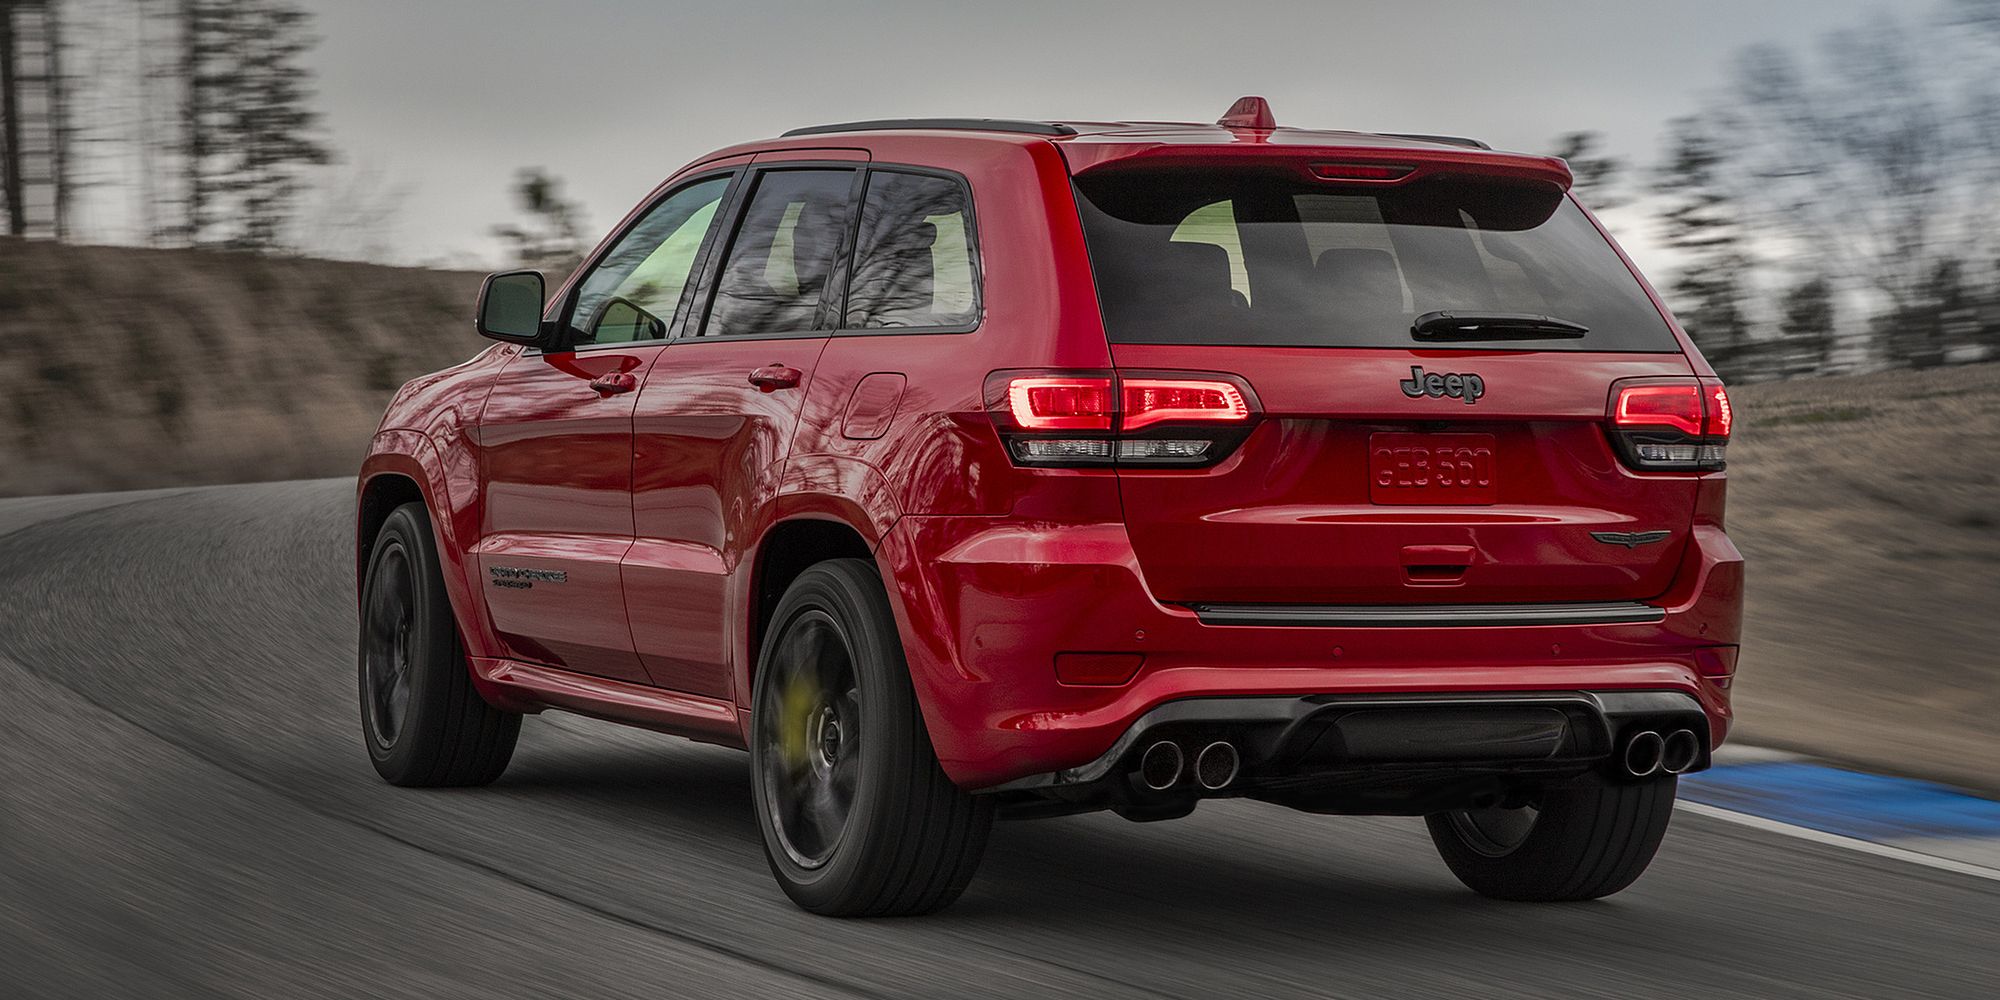 The back of the Jeep Grand Cherokee Trackhawk